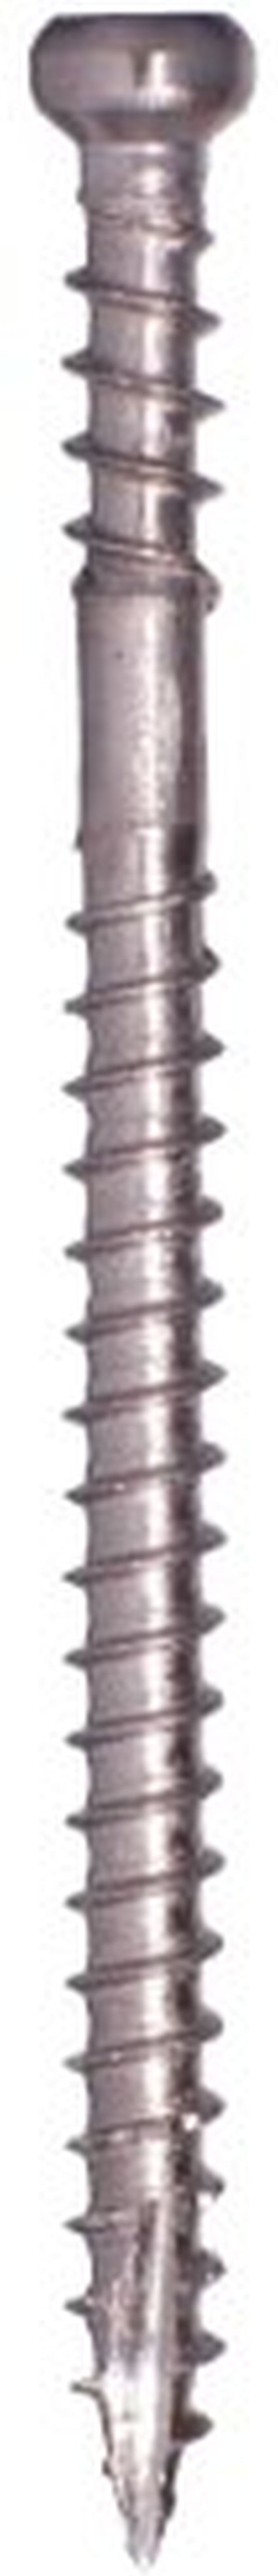 GRK 36077 8 by 2-Inch Containing 1pail Equal to 600 Screws Trim SS Propack